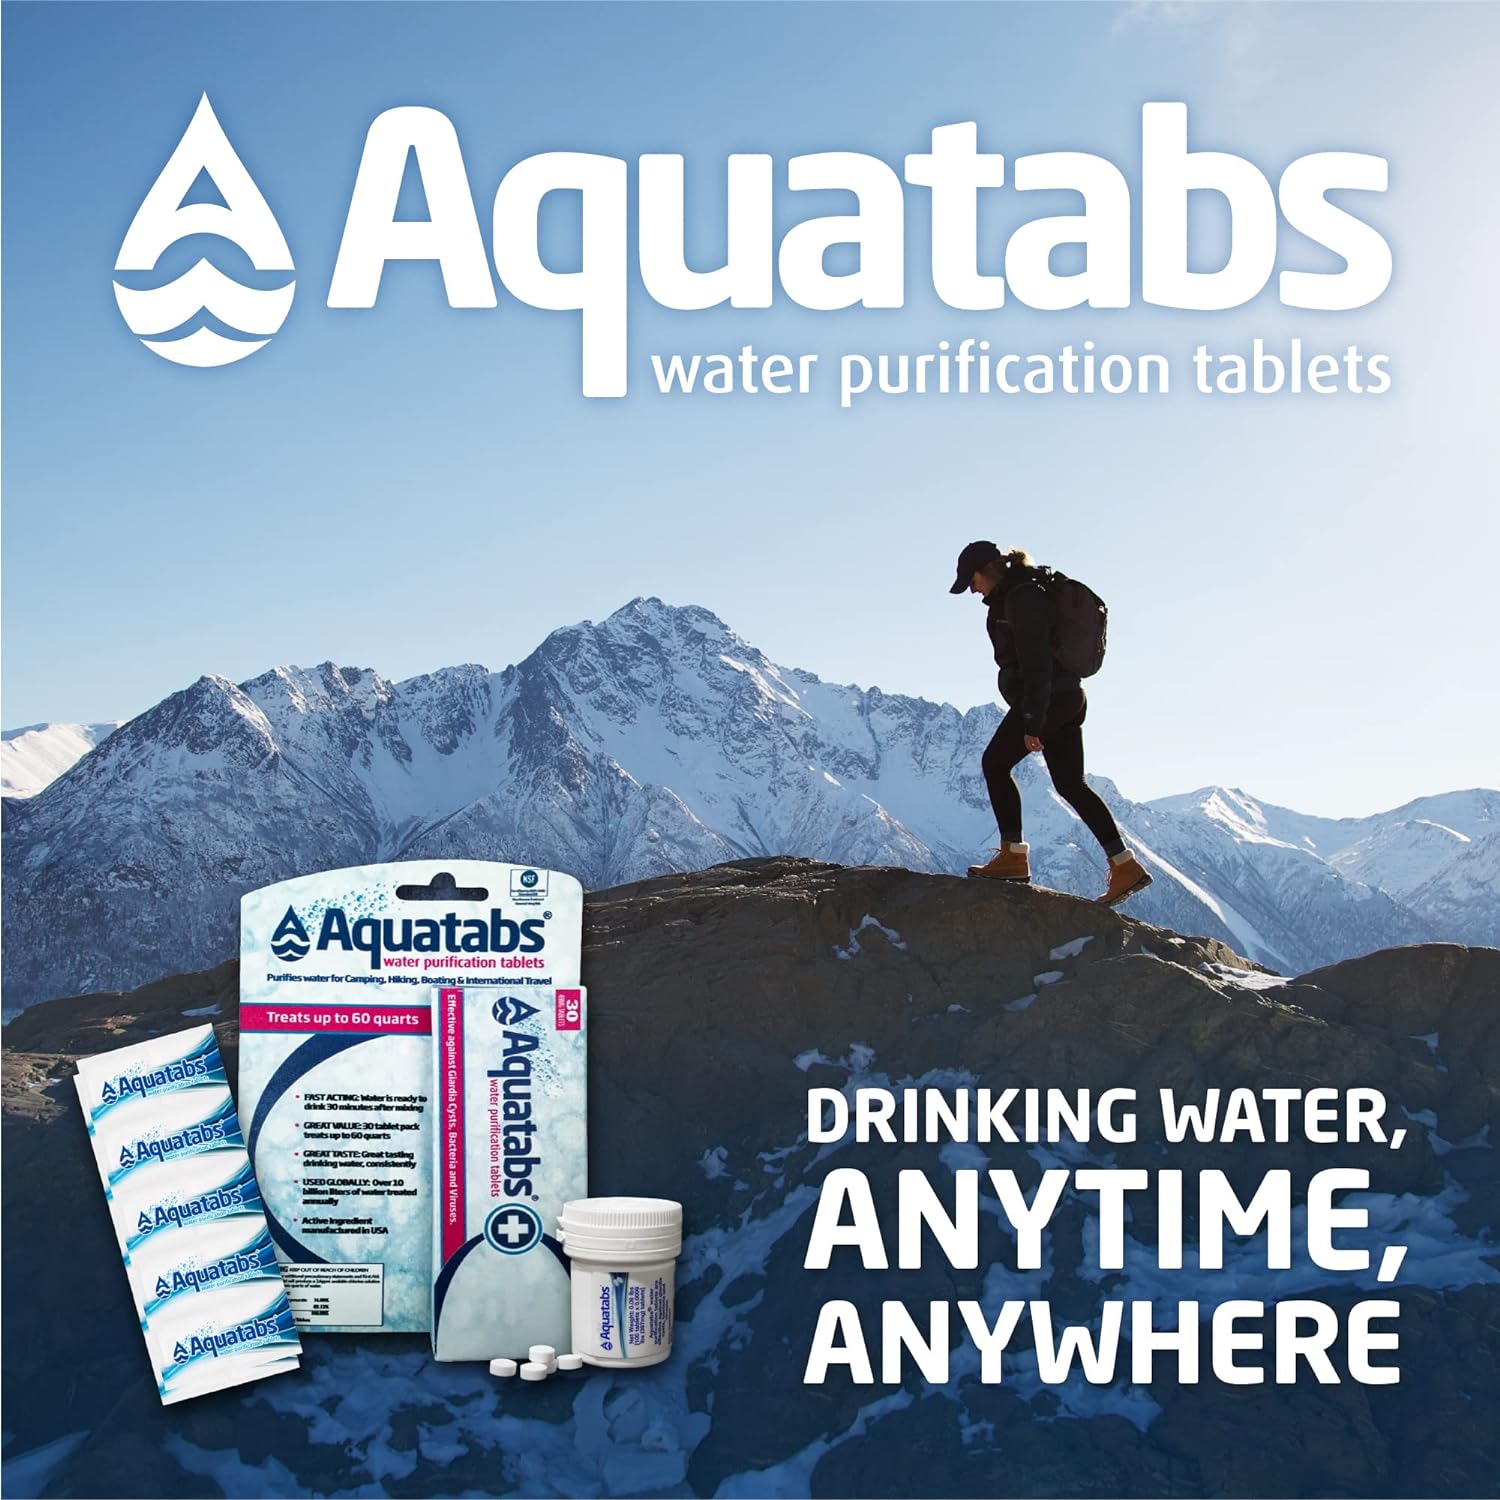 Aquatabs 397mg Water Purification Tablets Review